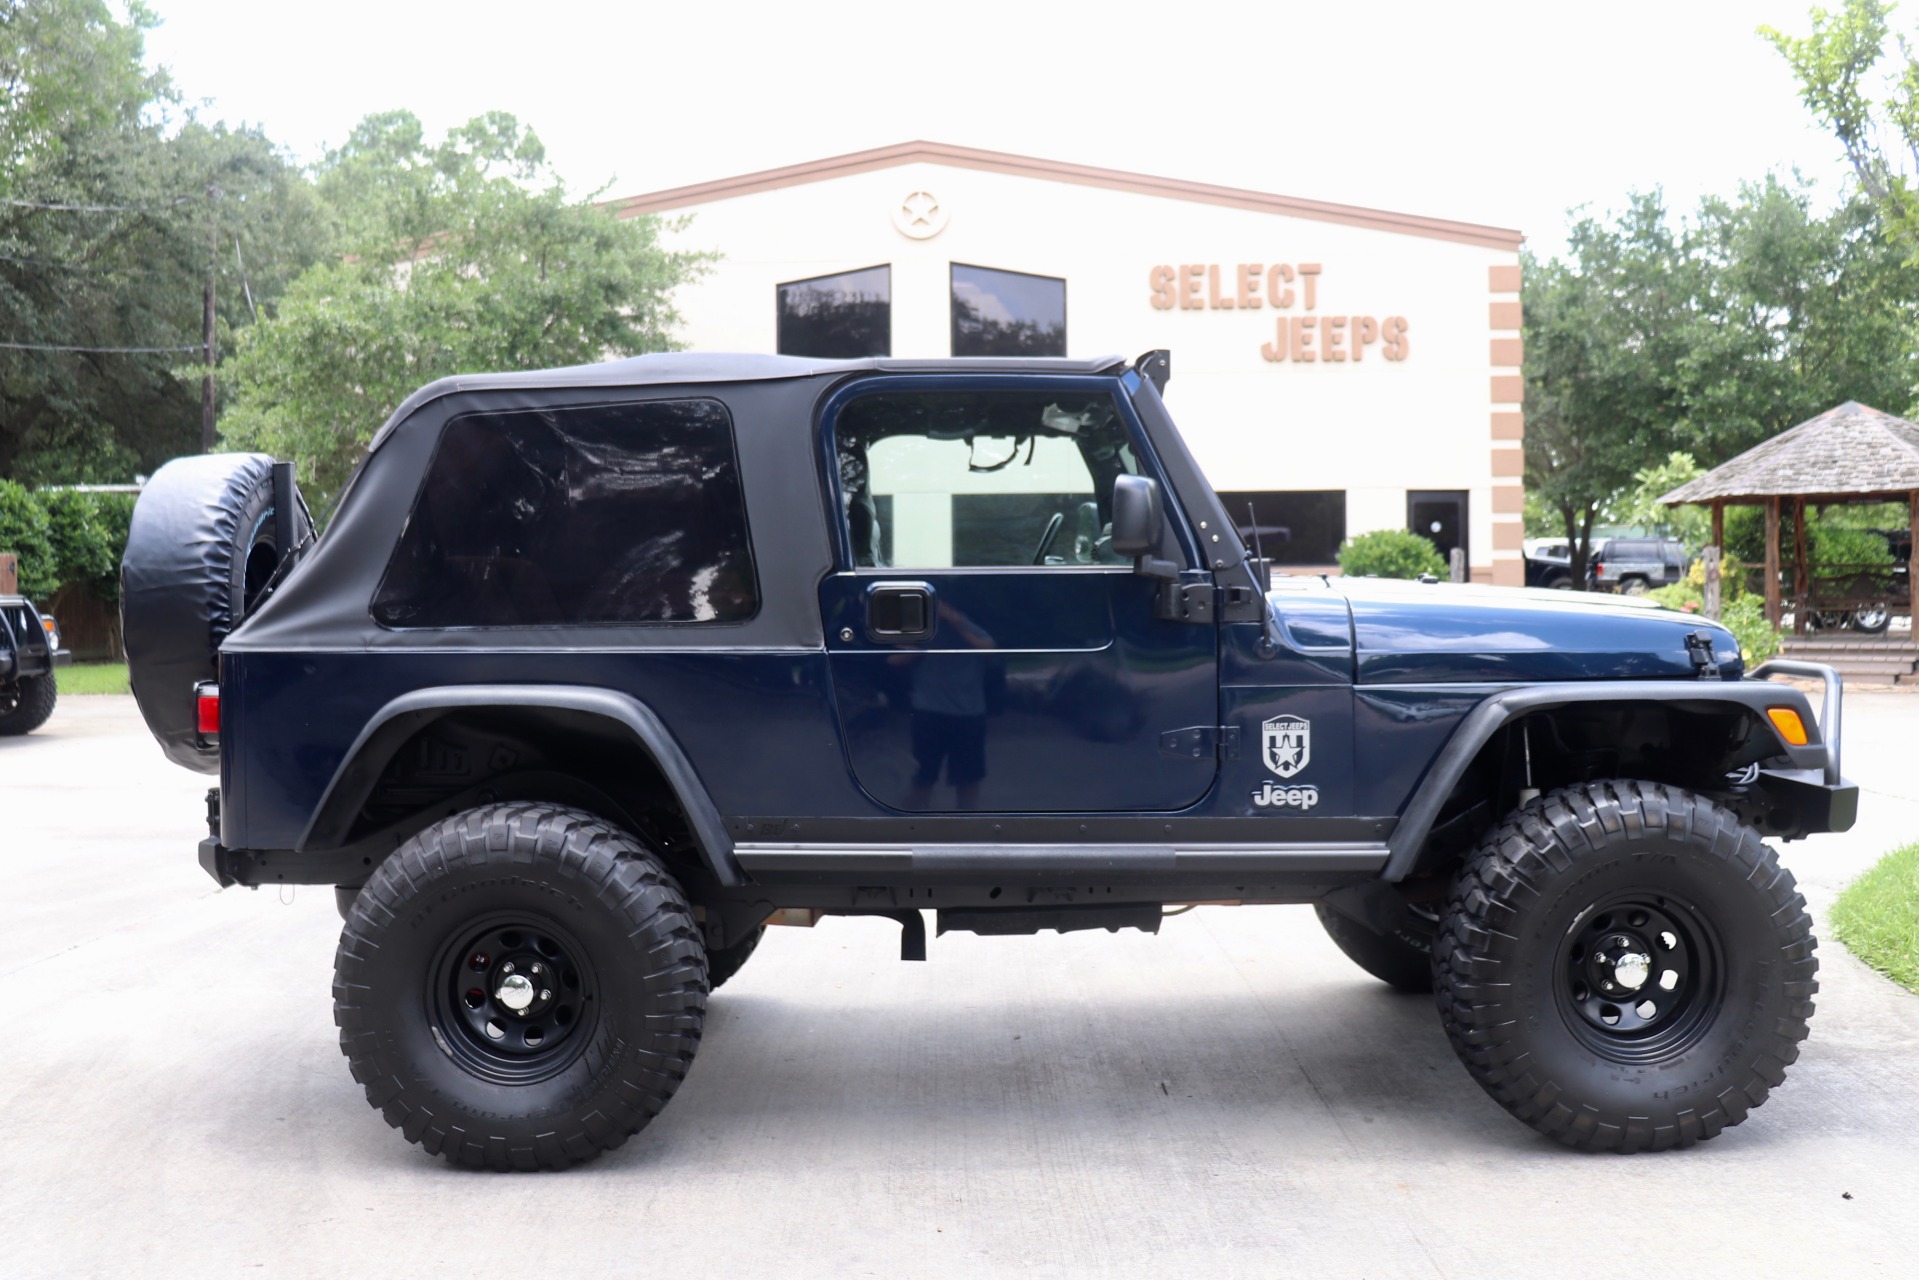 Used 2005 Jeep Wrangler Unlimited 2dr Unlimited For Sale ($18,995) | Select  Jeeps Inc. Stock #375180